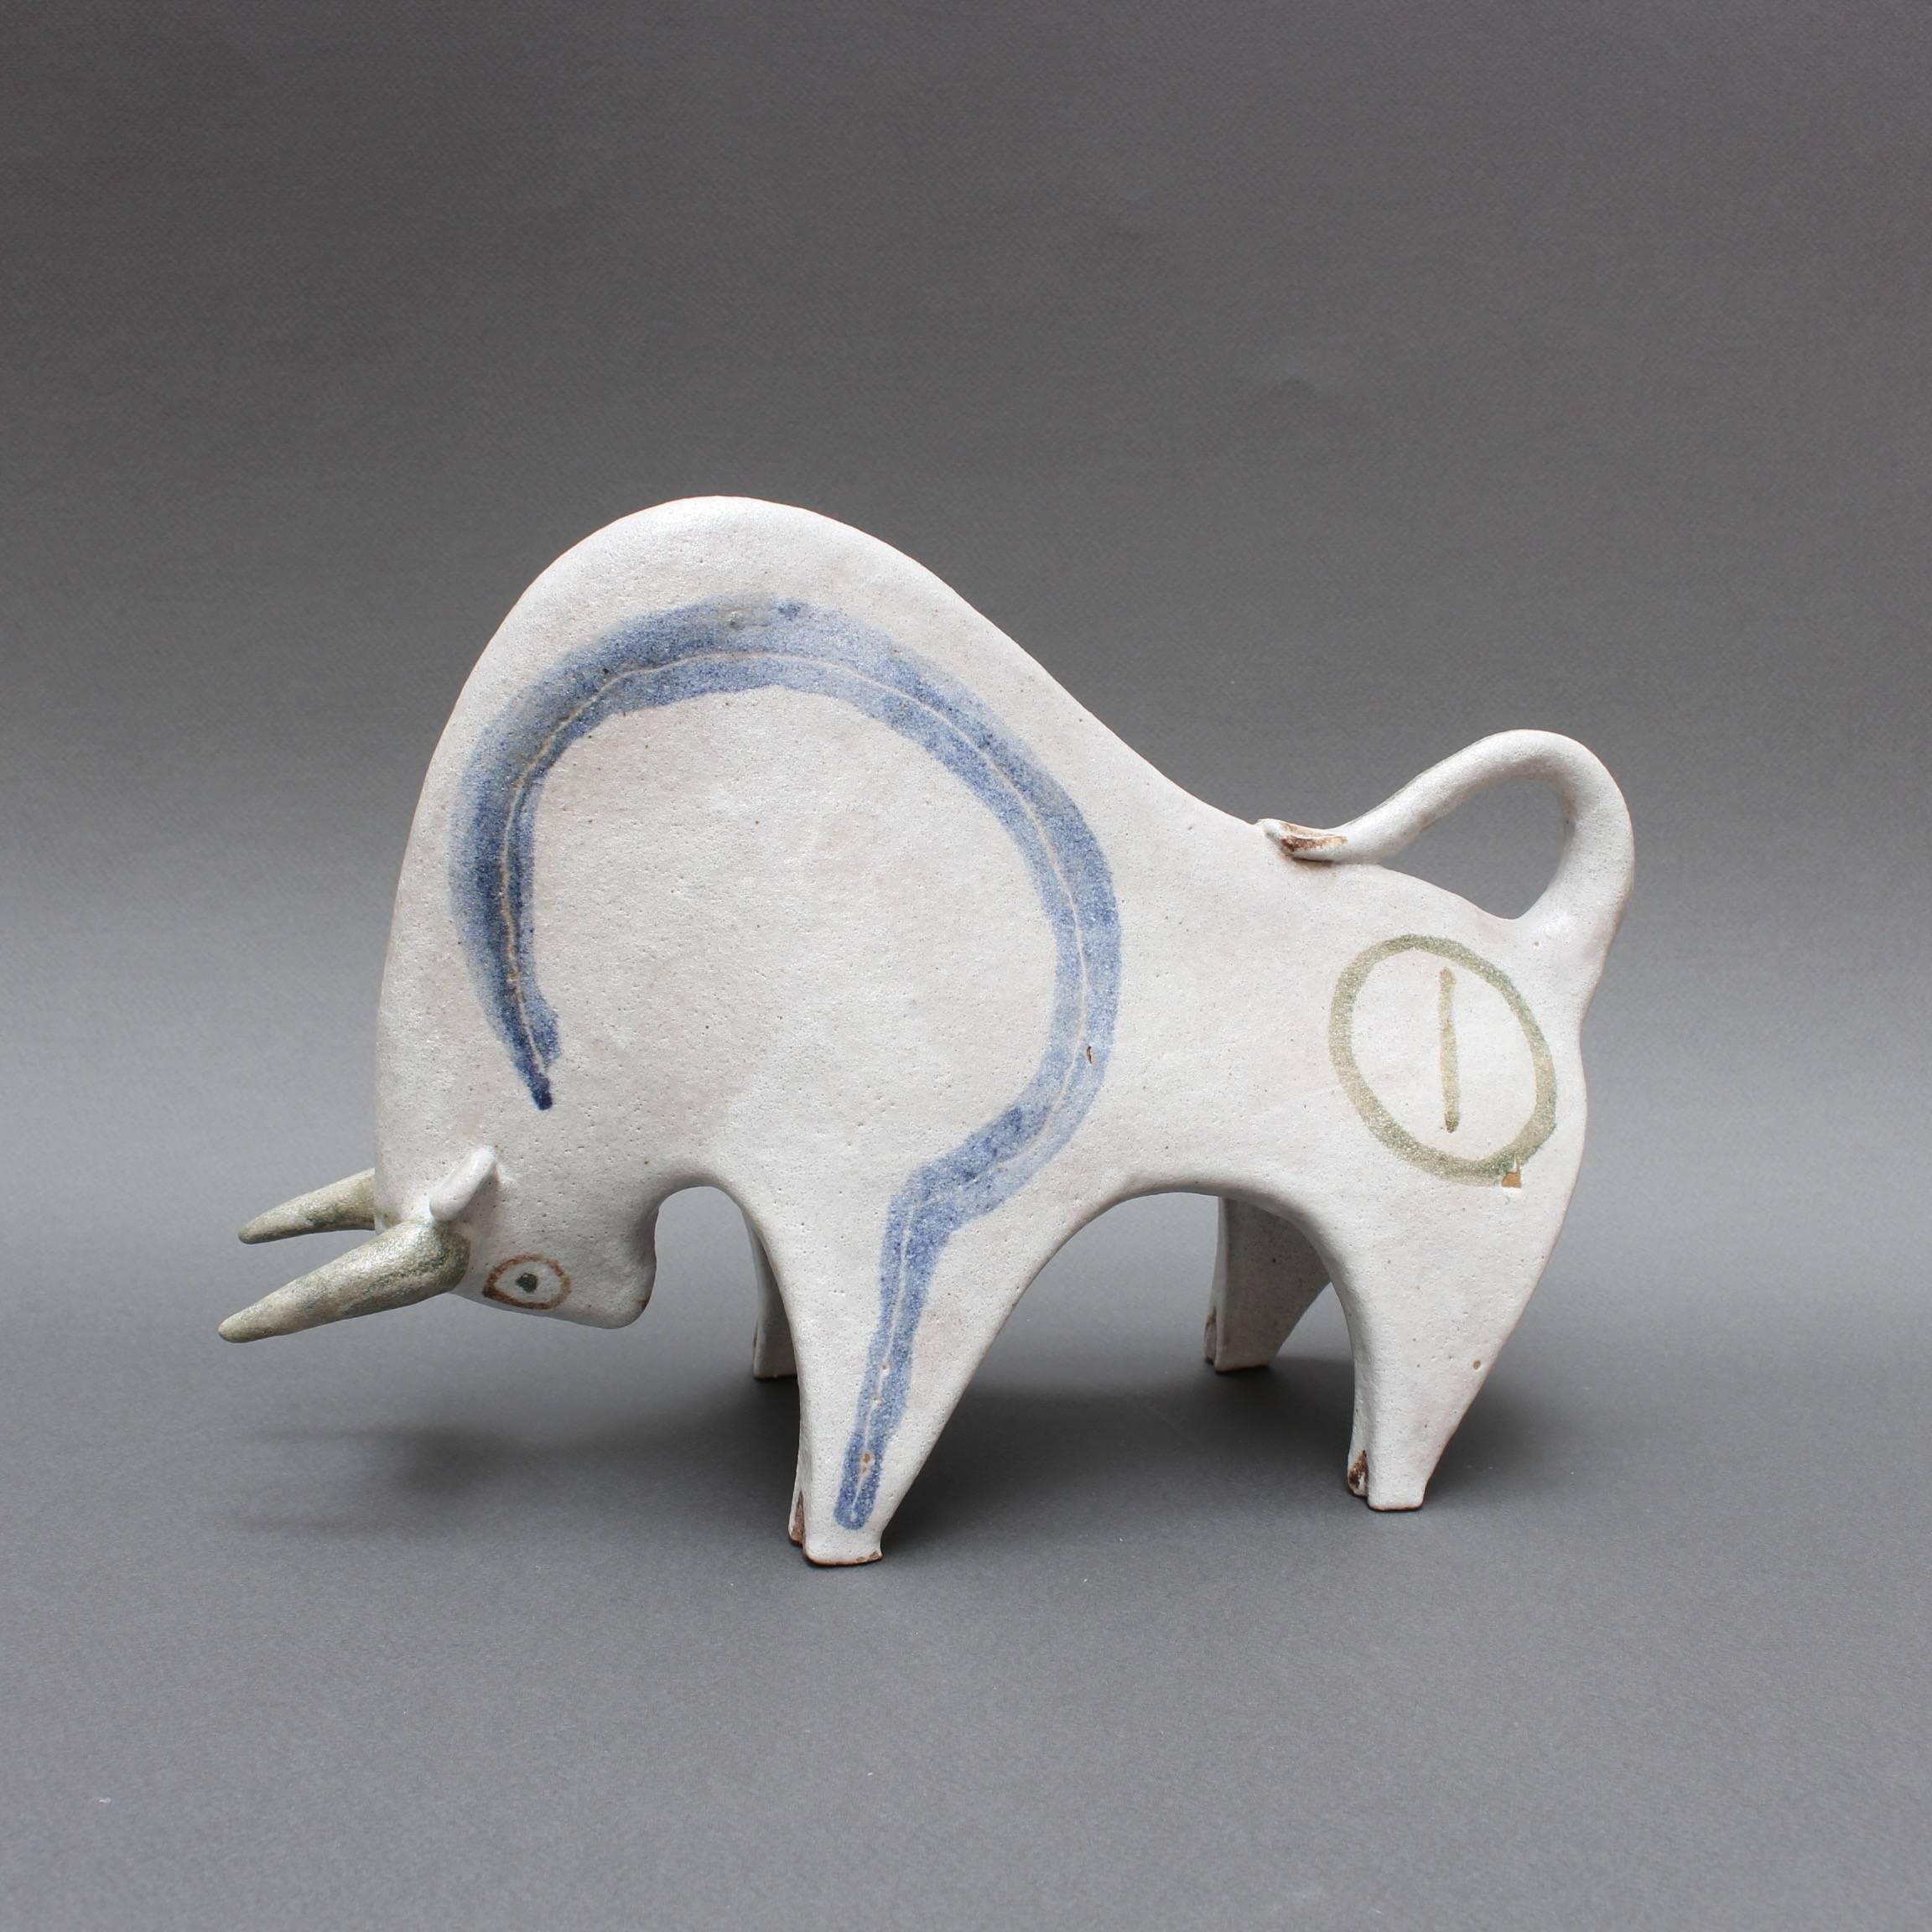 Ceramic decorative bull by Bruno Gambone, (circa 1970s). This is a piece from Gambone's series of chalk-white ceramic animal sculptures. A charging bull with blue lines highlighting the large torso. A playful circle with line - a sort of bullseye -